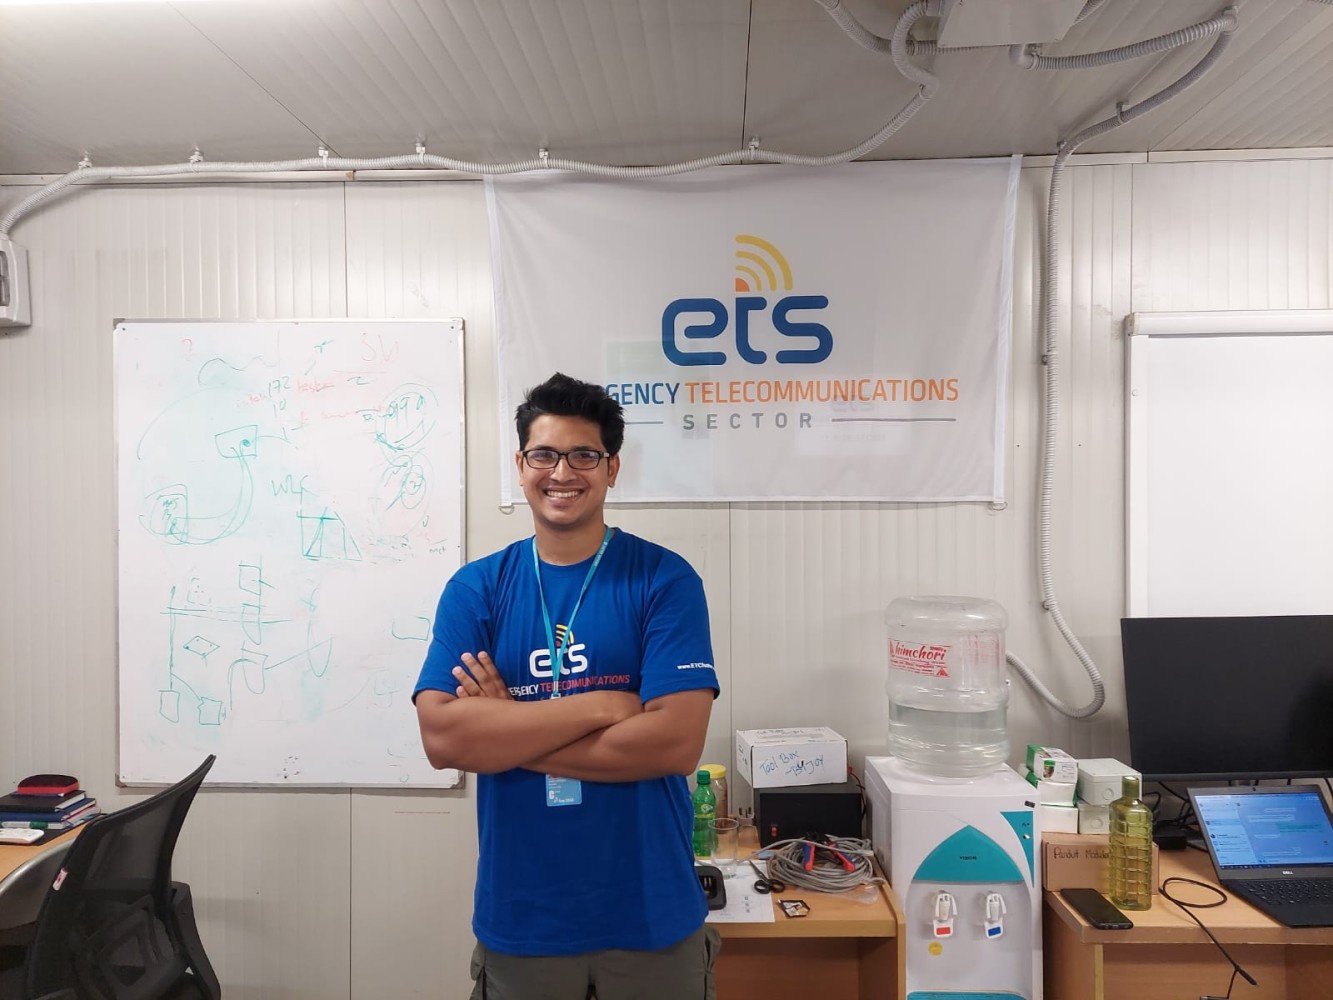  Shaown Chowdhury, an IT Operations Assistant with the WFP-led Emergency Telecommunications Sector (ETS) in Cox’s Bazar